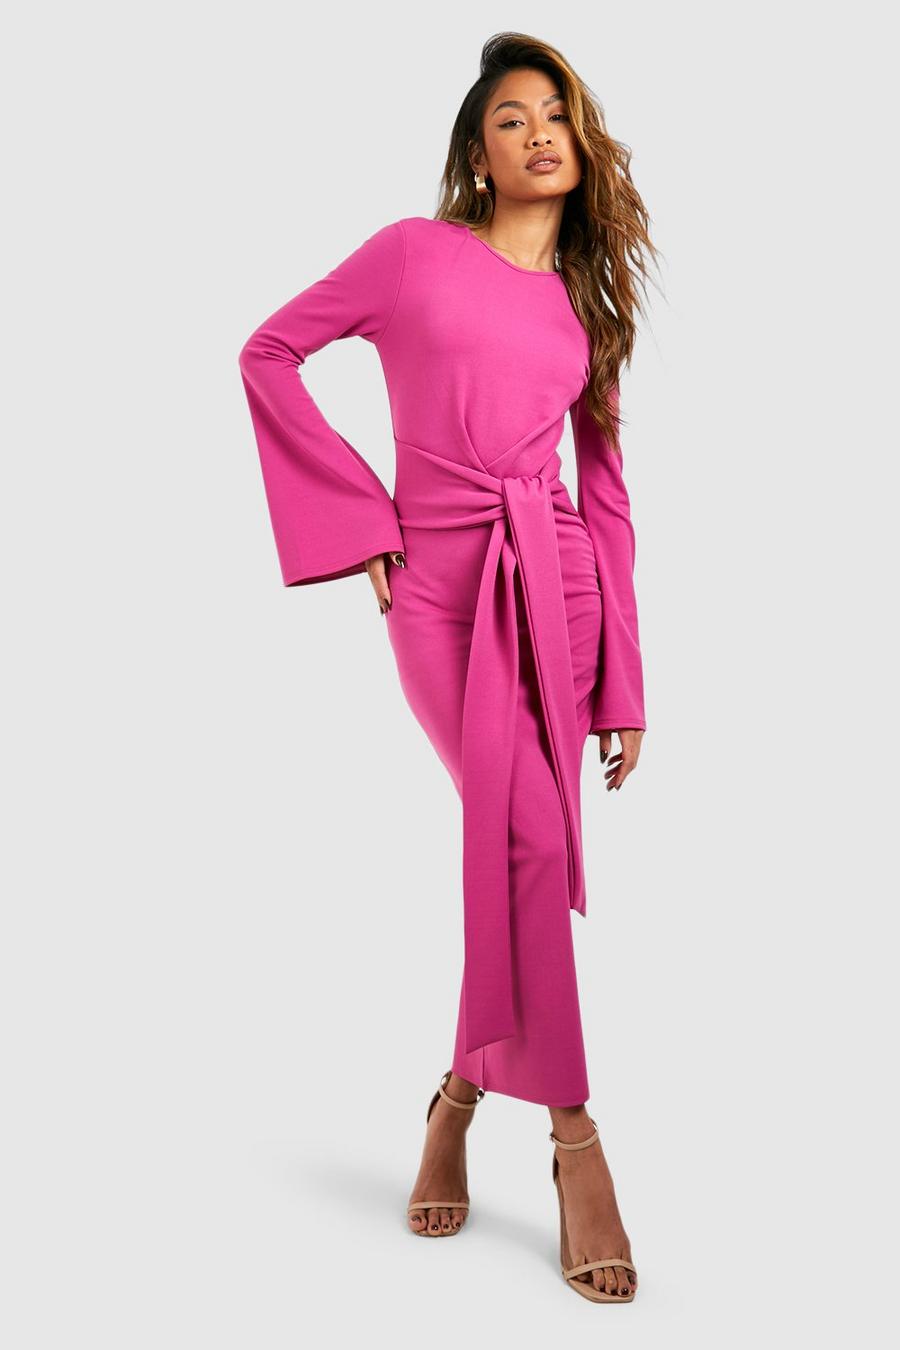 Magenta pink Knot Front Flared Sleeve Crepe Midaxi Dress